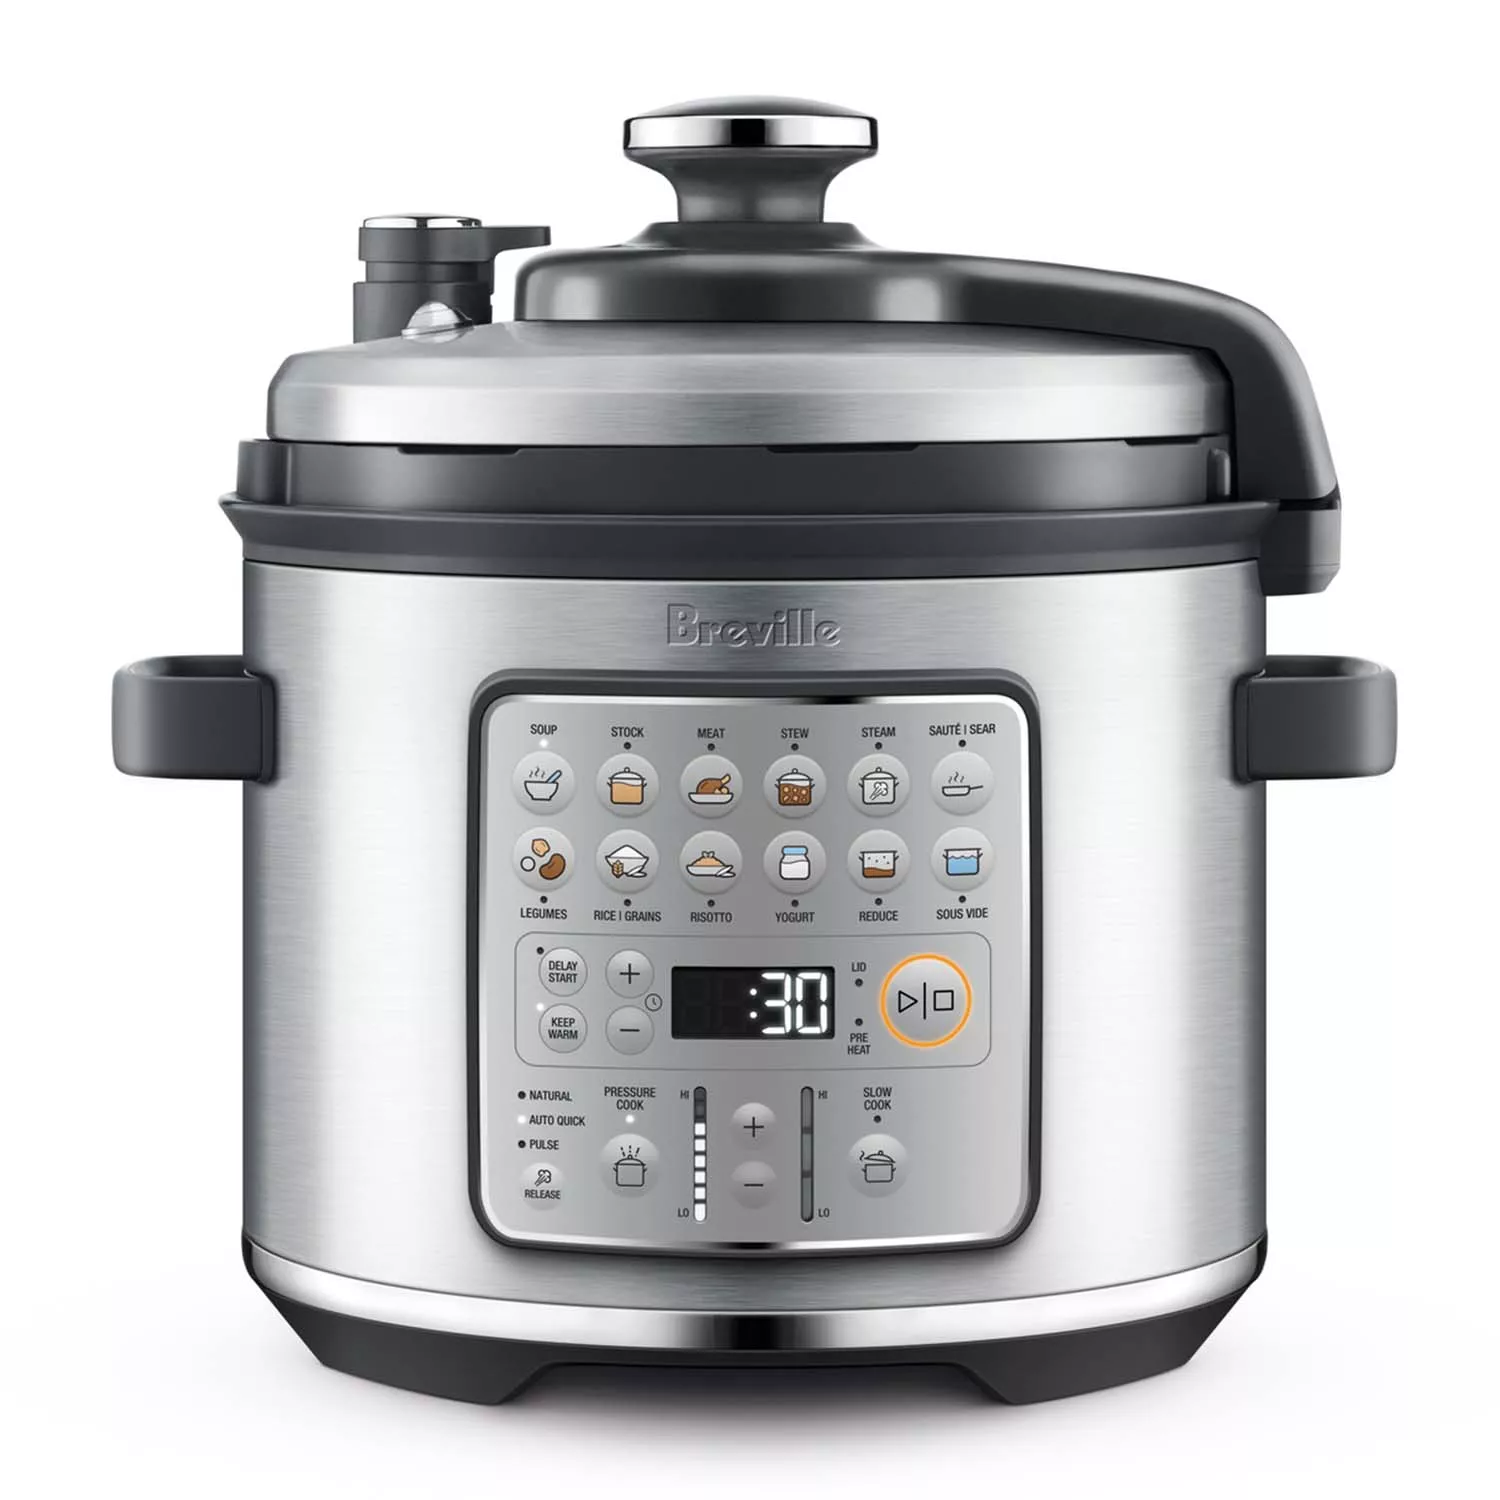 So you got an Instant Pot 7-in-1 multi-cooker under the tree